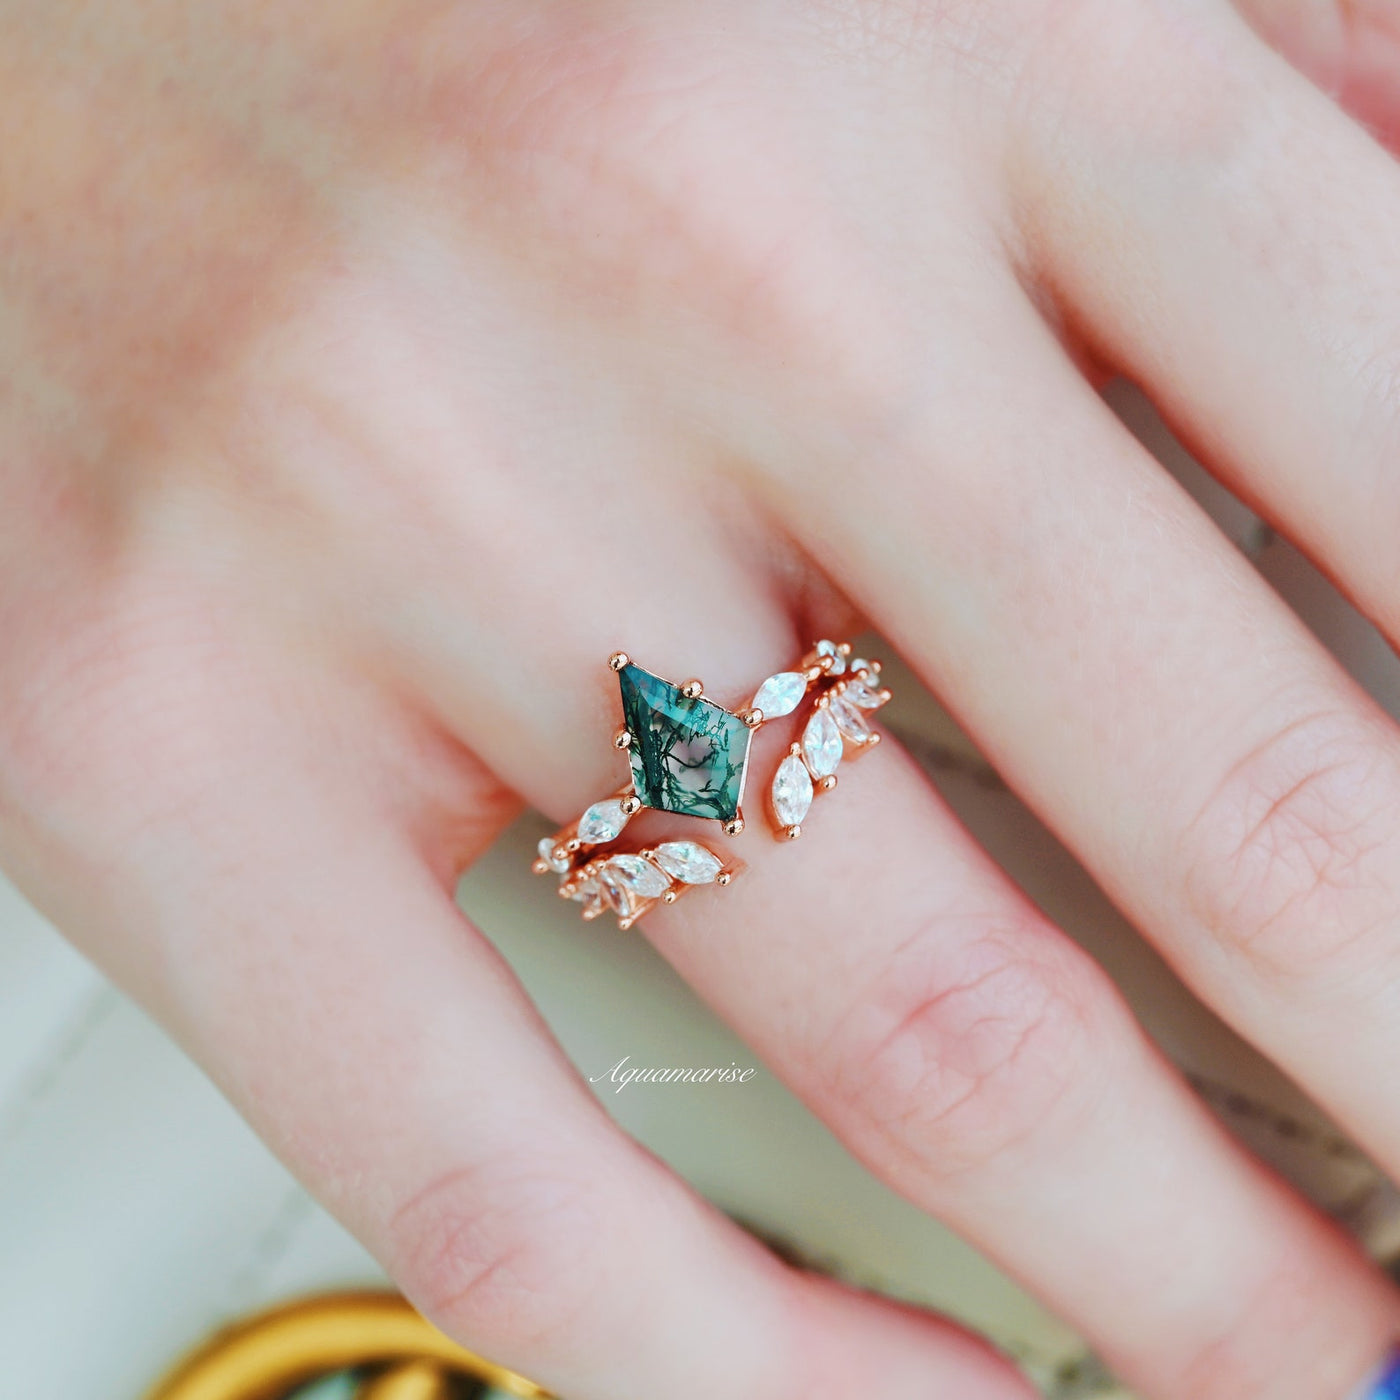 Kite Green Moss Agate Ring- 14K Rose Gold Vermeil Natural Agate Engagement Ring- Nature Promise Ring Green Gemstone Anniversary Gift For Her